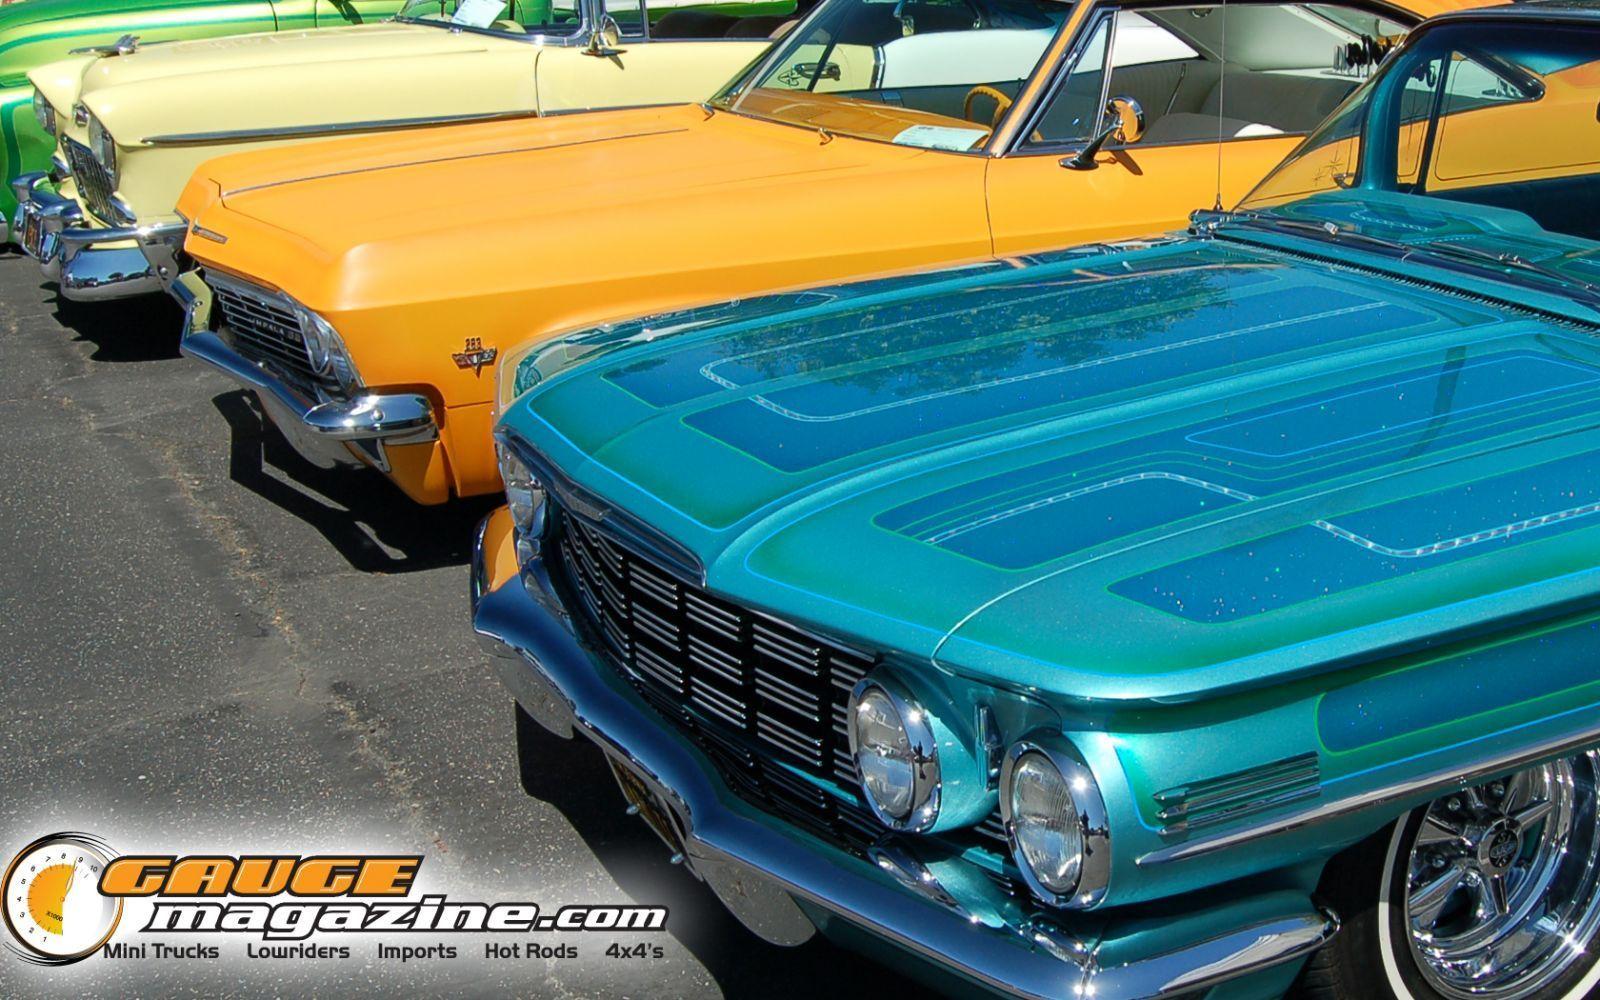 Gauge Magazine. Lowrider Wallpaper from Relaxin in So Cal 2011